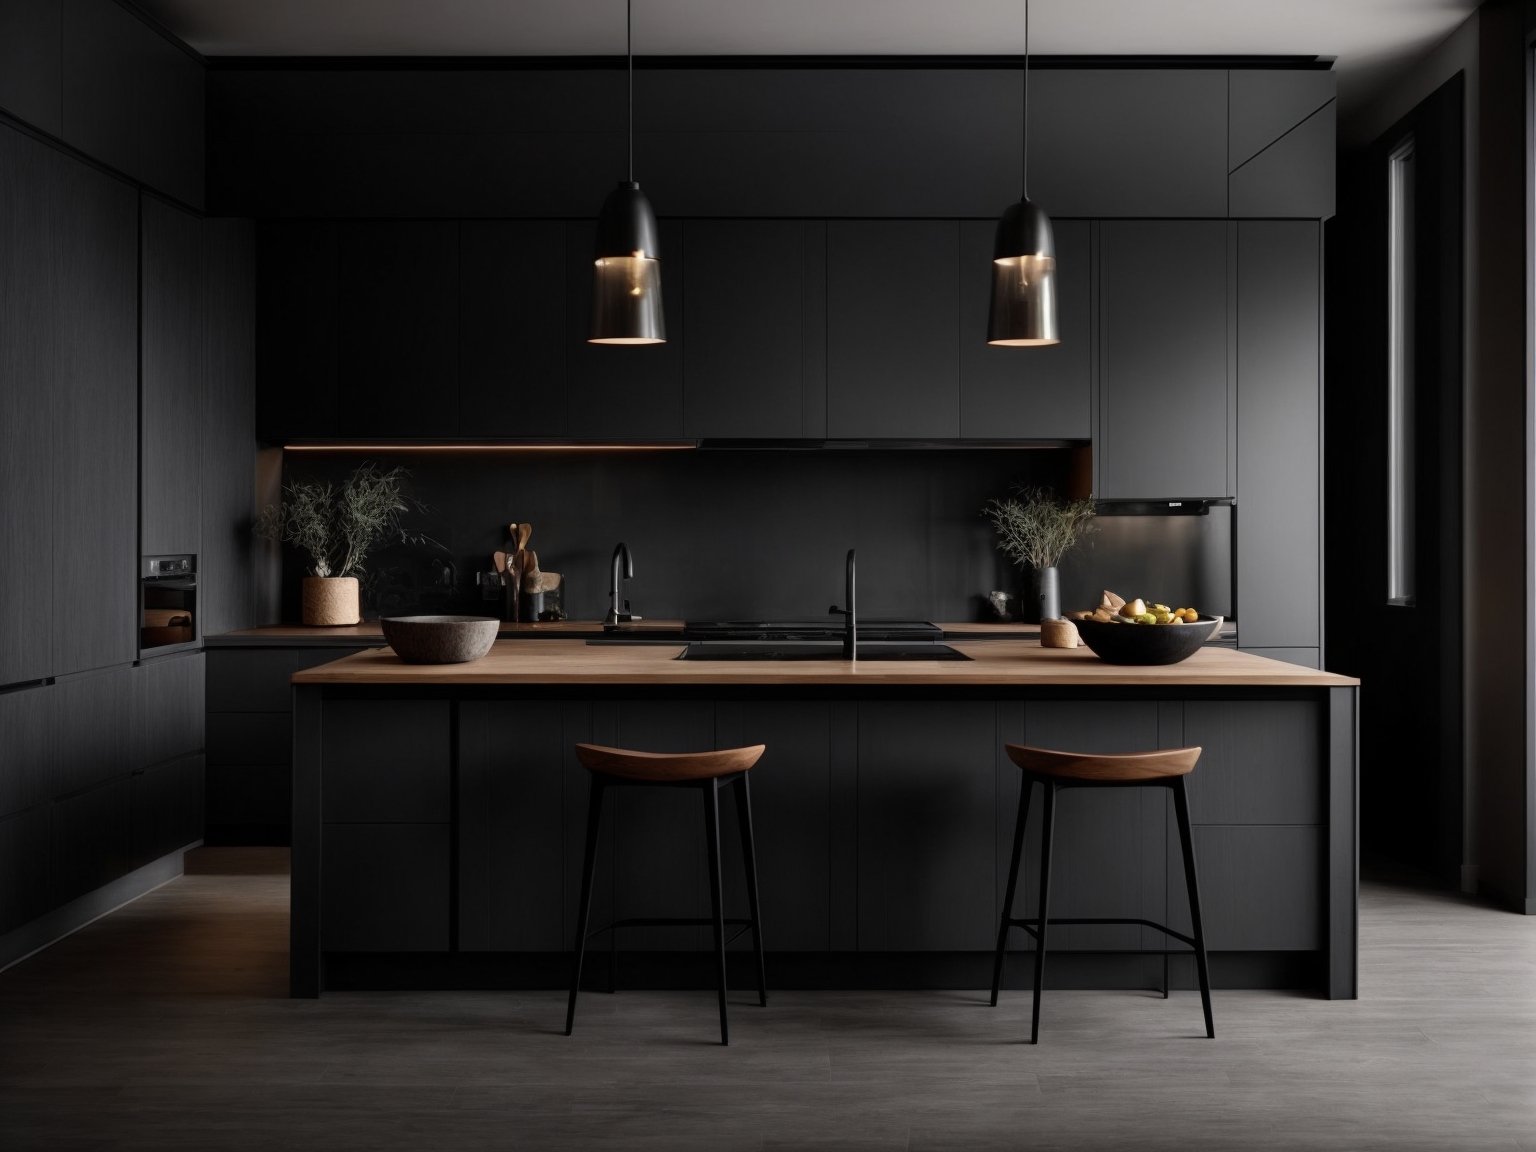 A stylish kitchen with modern dark grey cabinets and black granite countertops